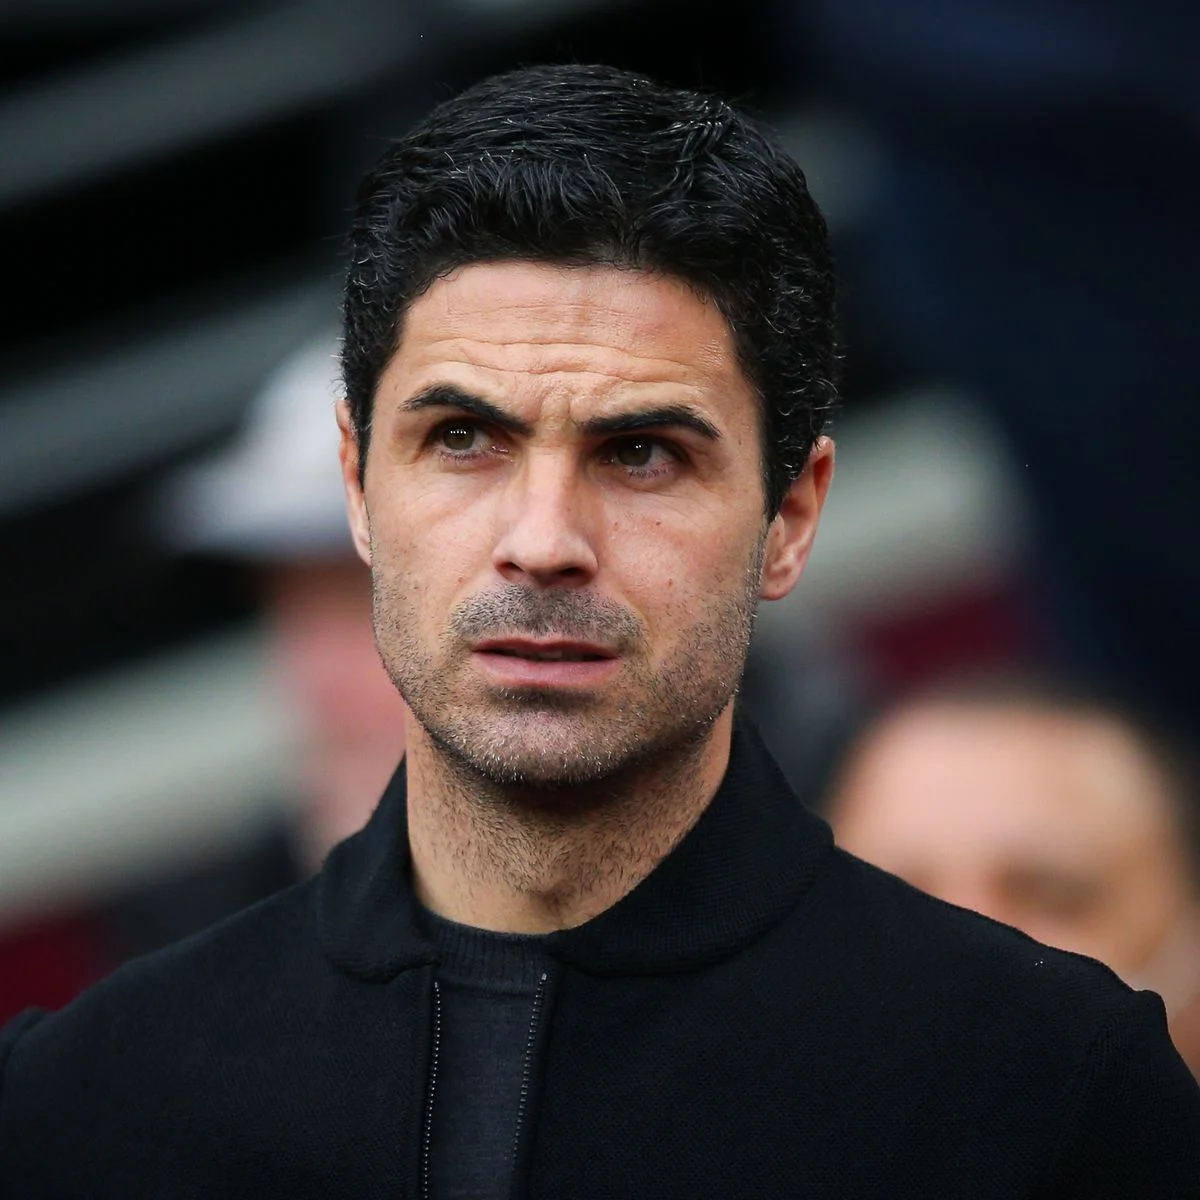 Arsenal vs Everton Preview: Arteta’s Plea for Support from West Ham